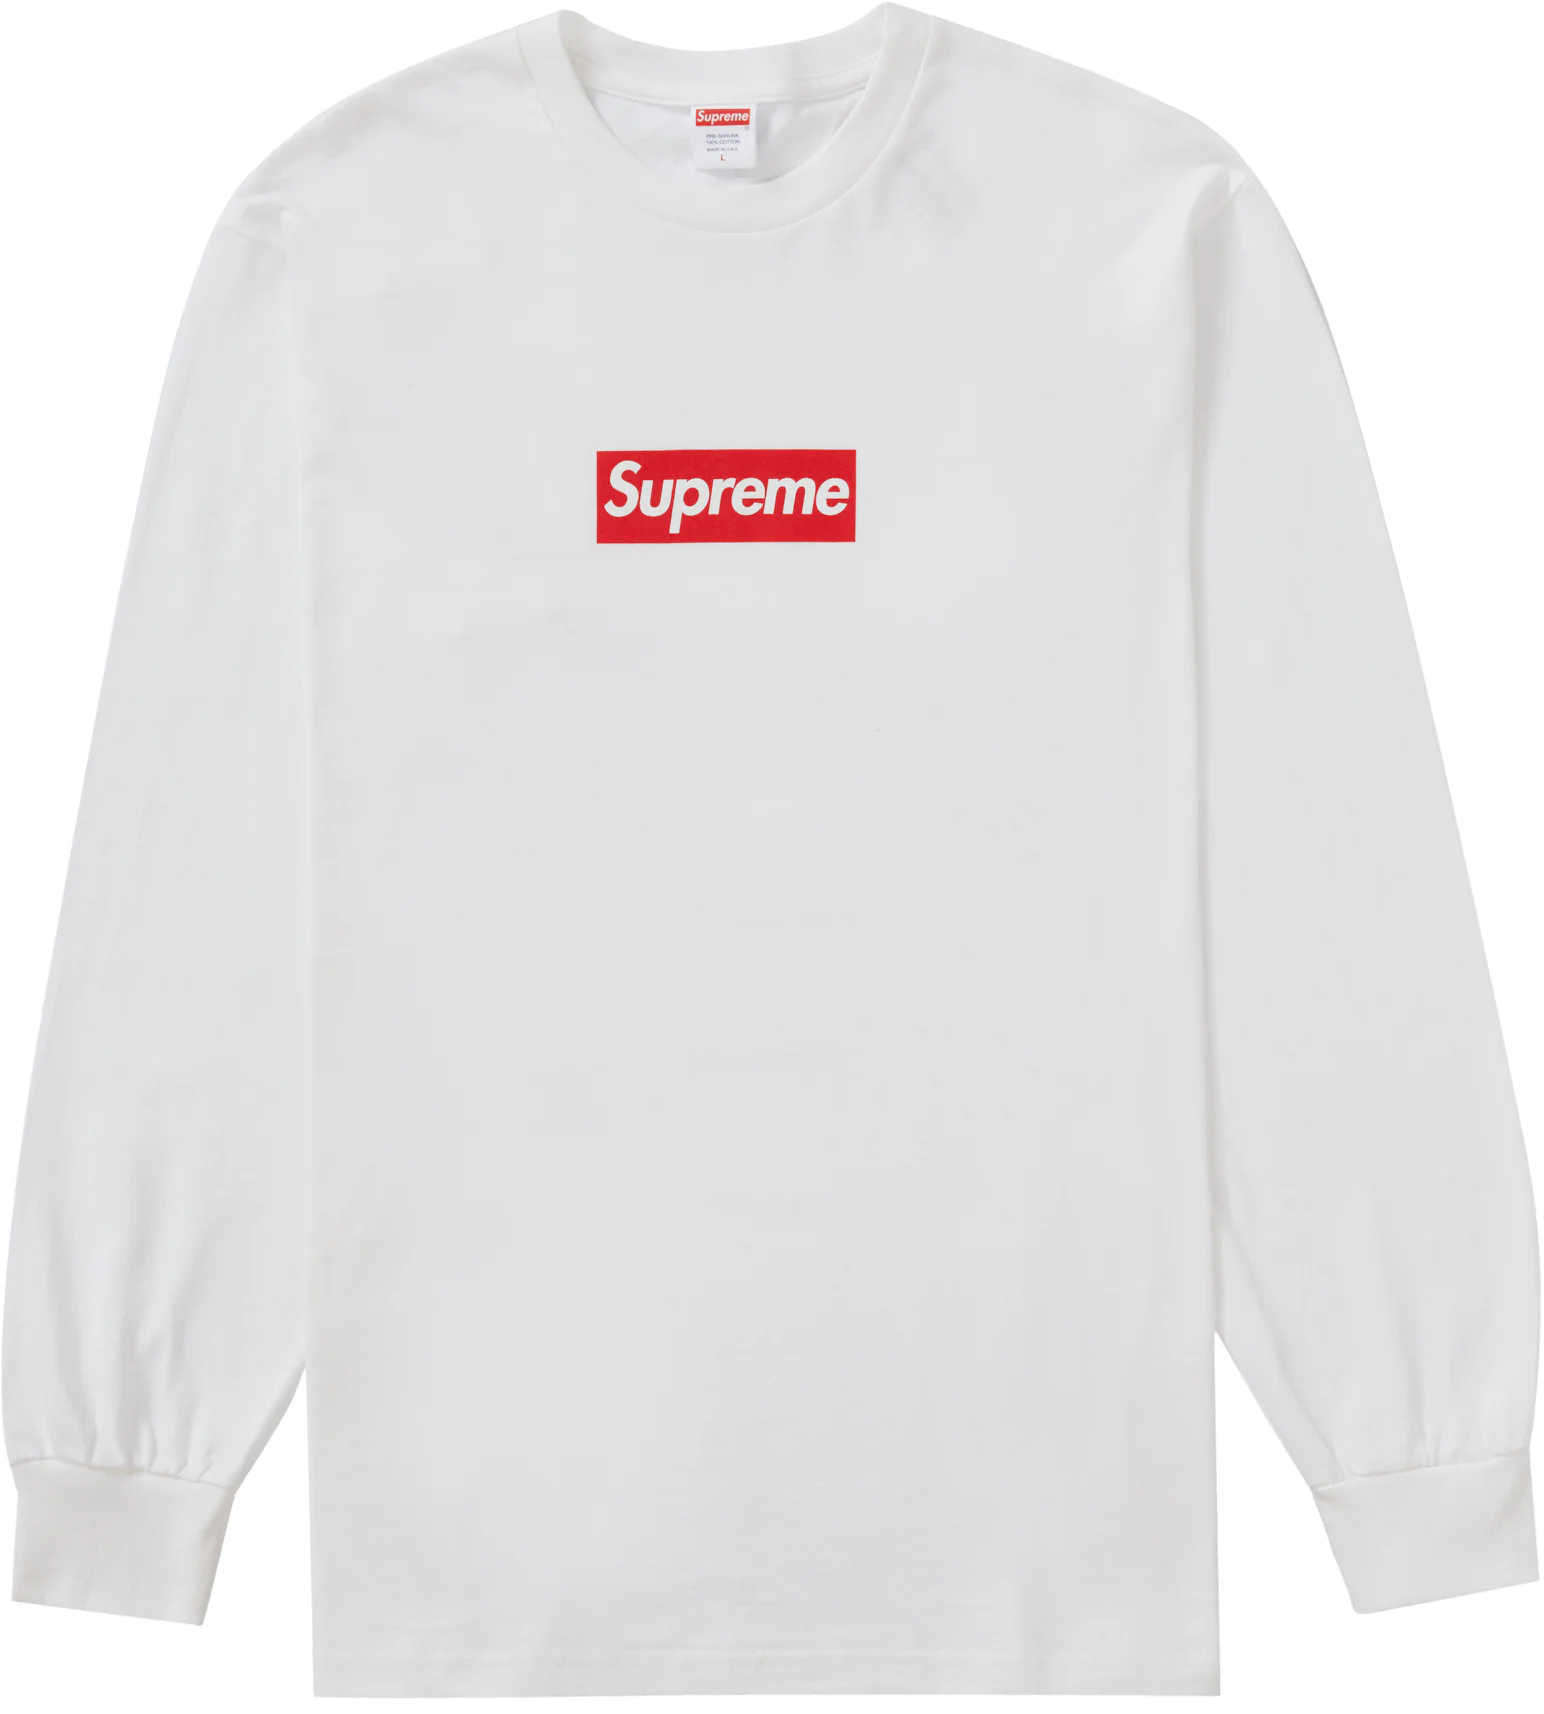 Supreme Mock Neck L/S Top Long Sleeve Tee T-Shirt Jersey FW22 White Size XL  NWT